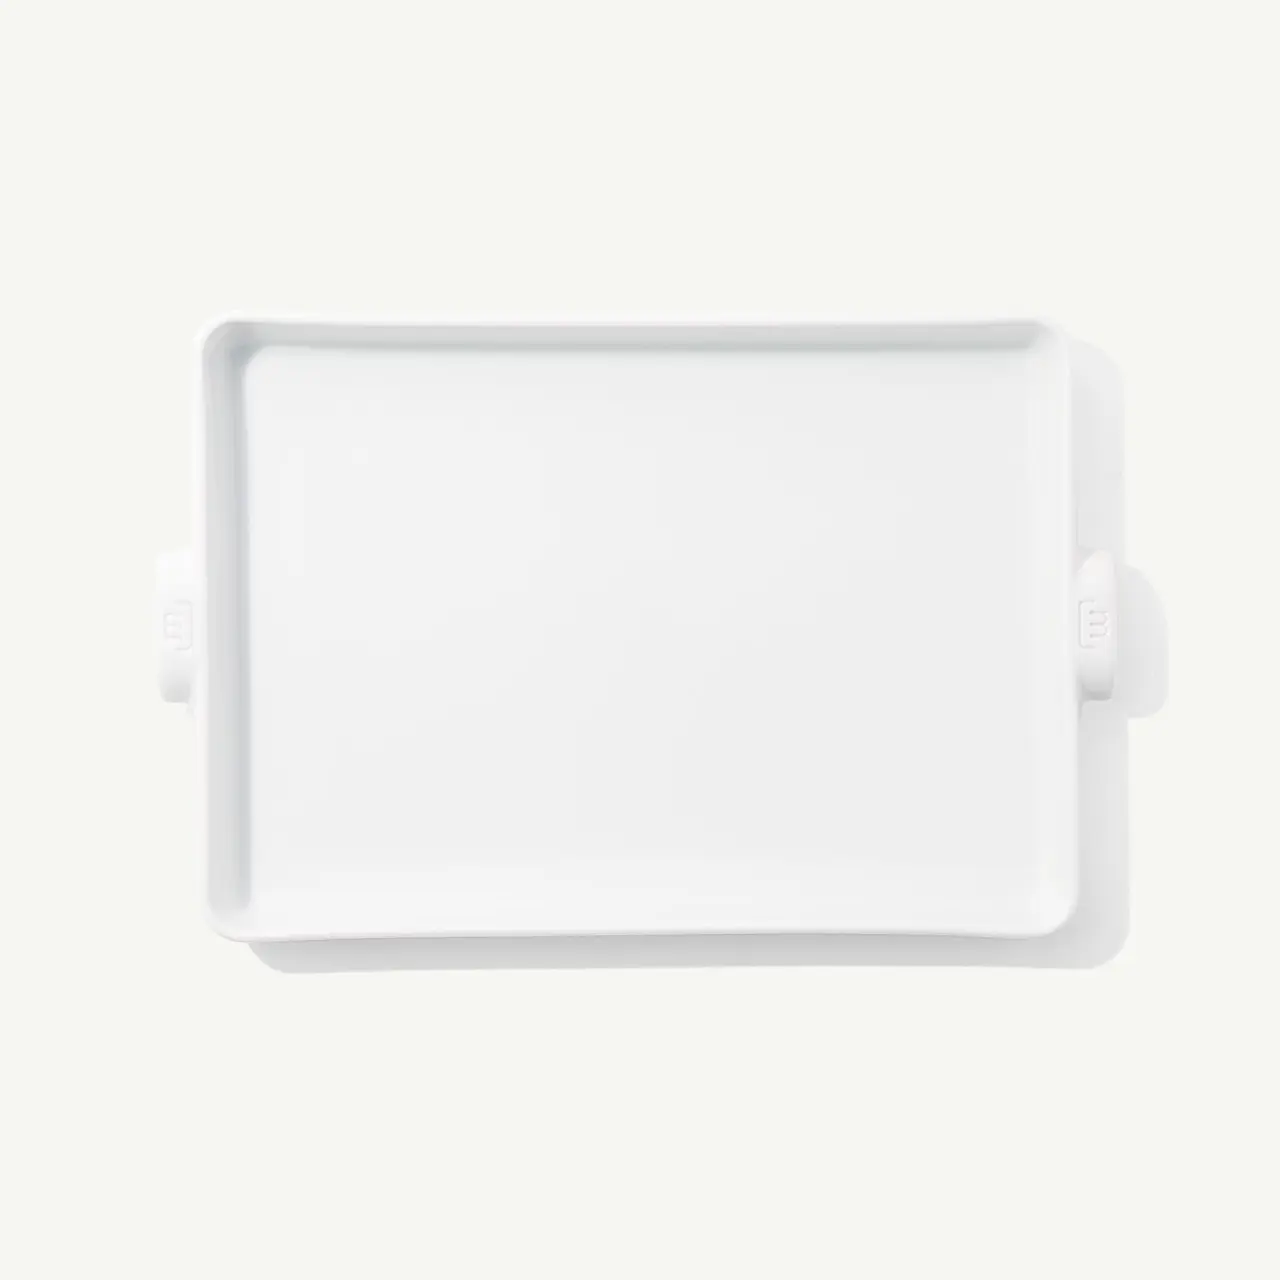 A white rectangular tray with handles viewed from above on a plain background.